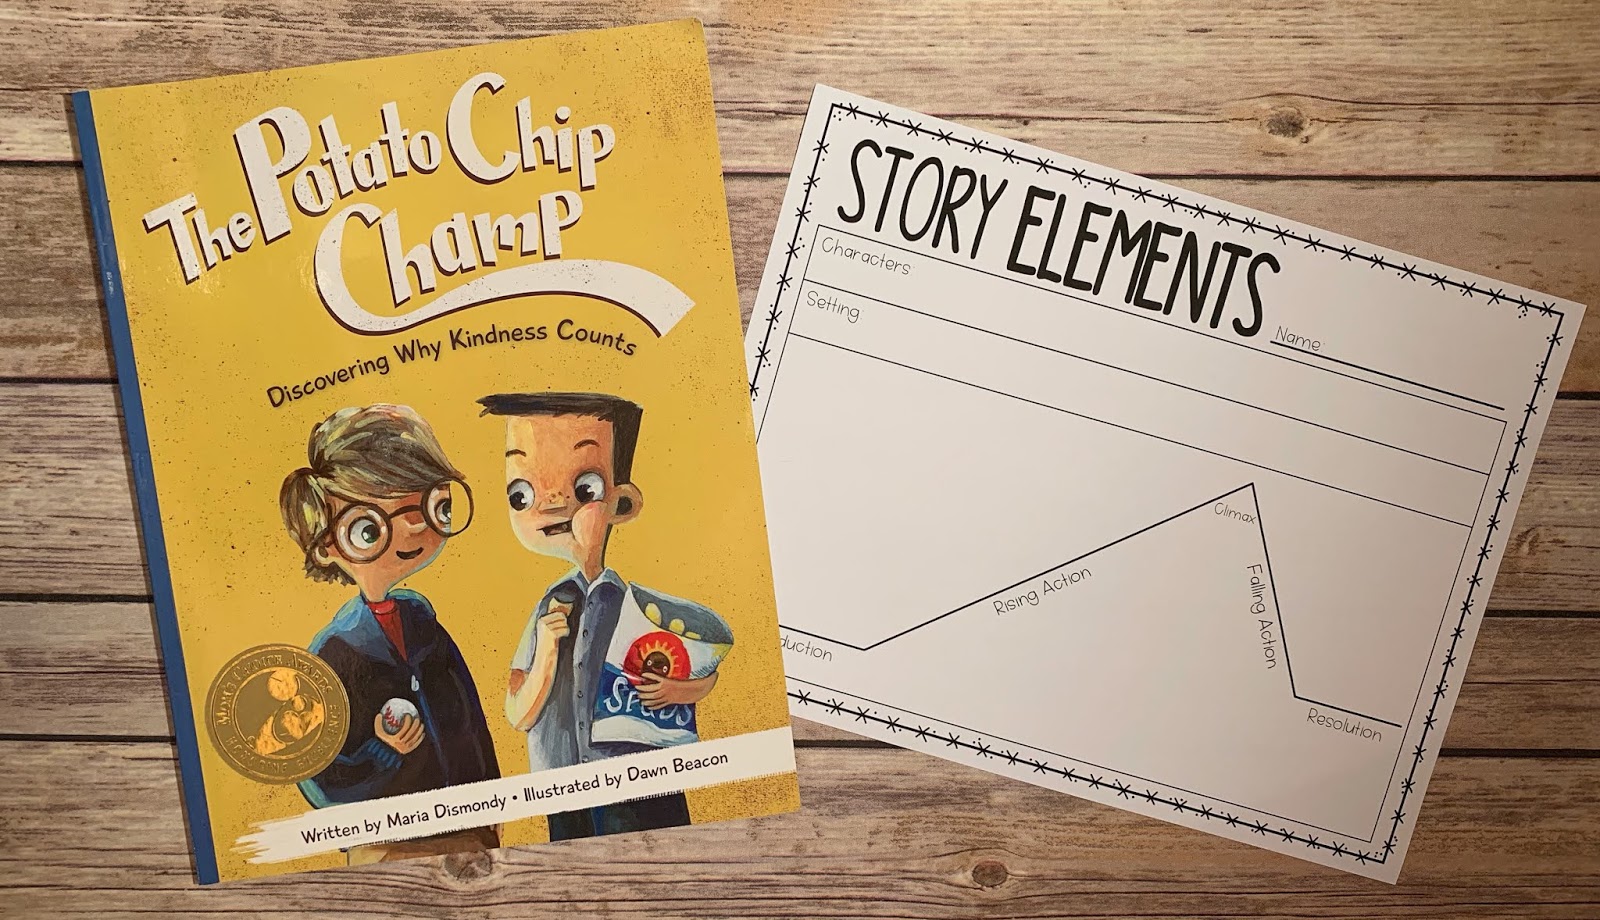 Mentor Text with text "The Potato Chip Champ" and Graphic Organizer with text "Story Elements"